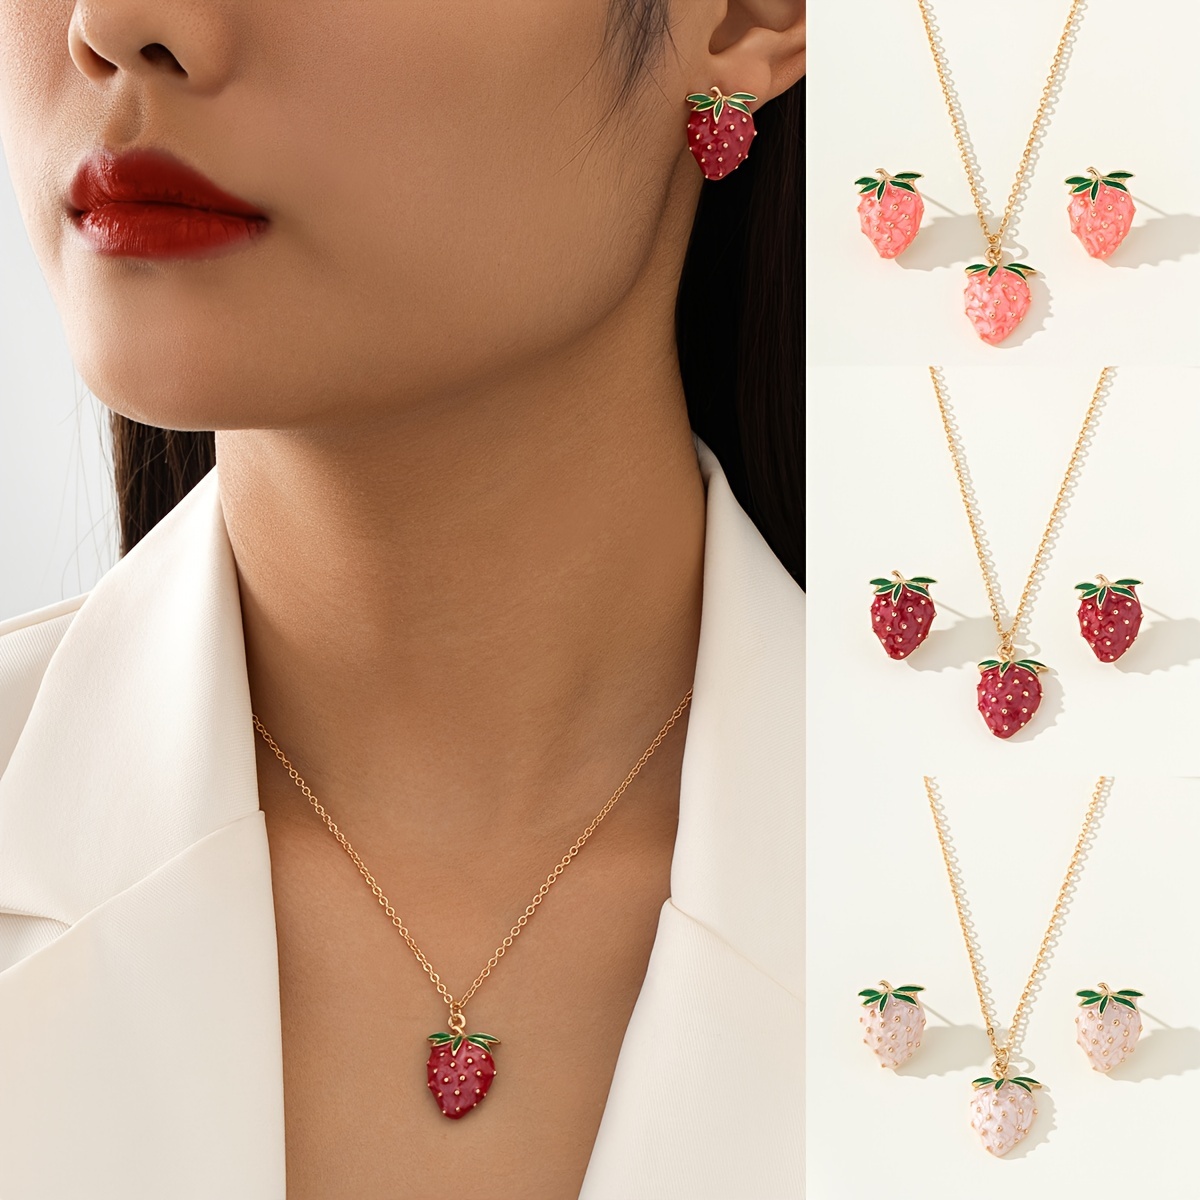 

1 Set Chic Cute Enamel Glazed Strawberry Pendant Necklace And Stud Earrings, Pastoral Style Fashion Jewelry For Women